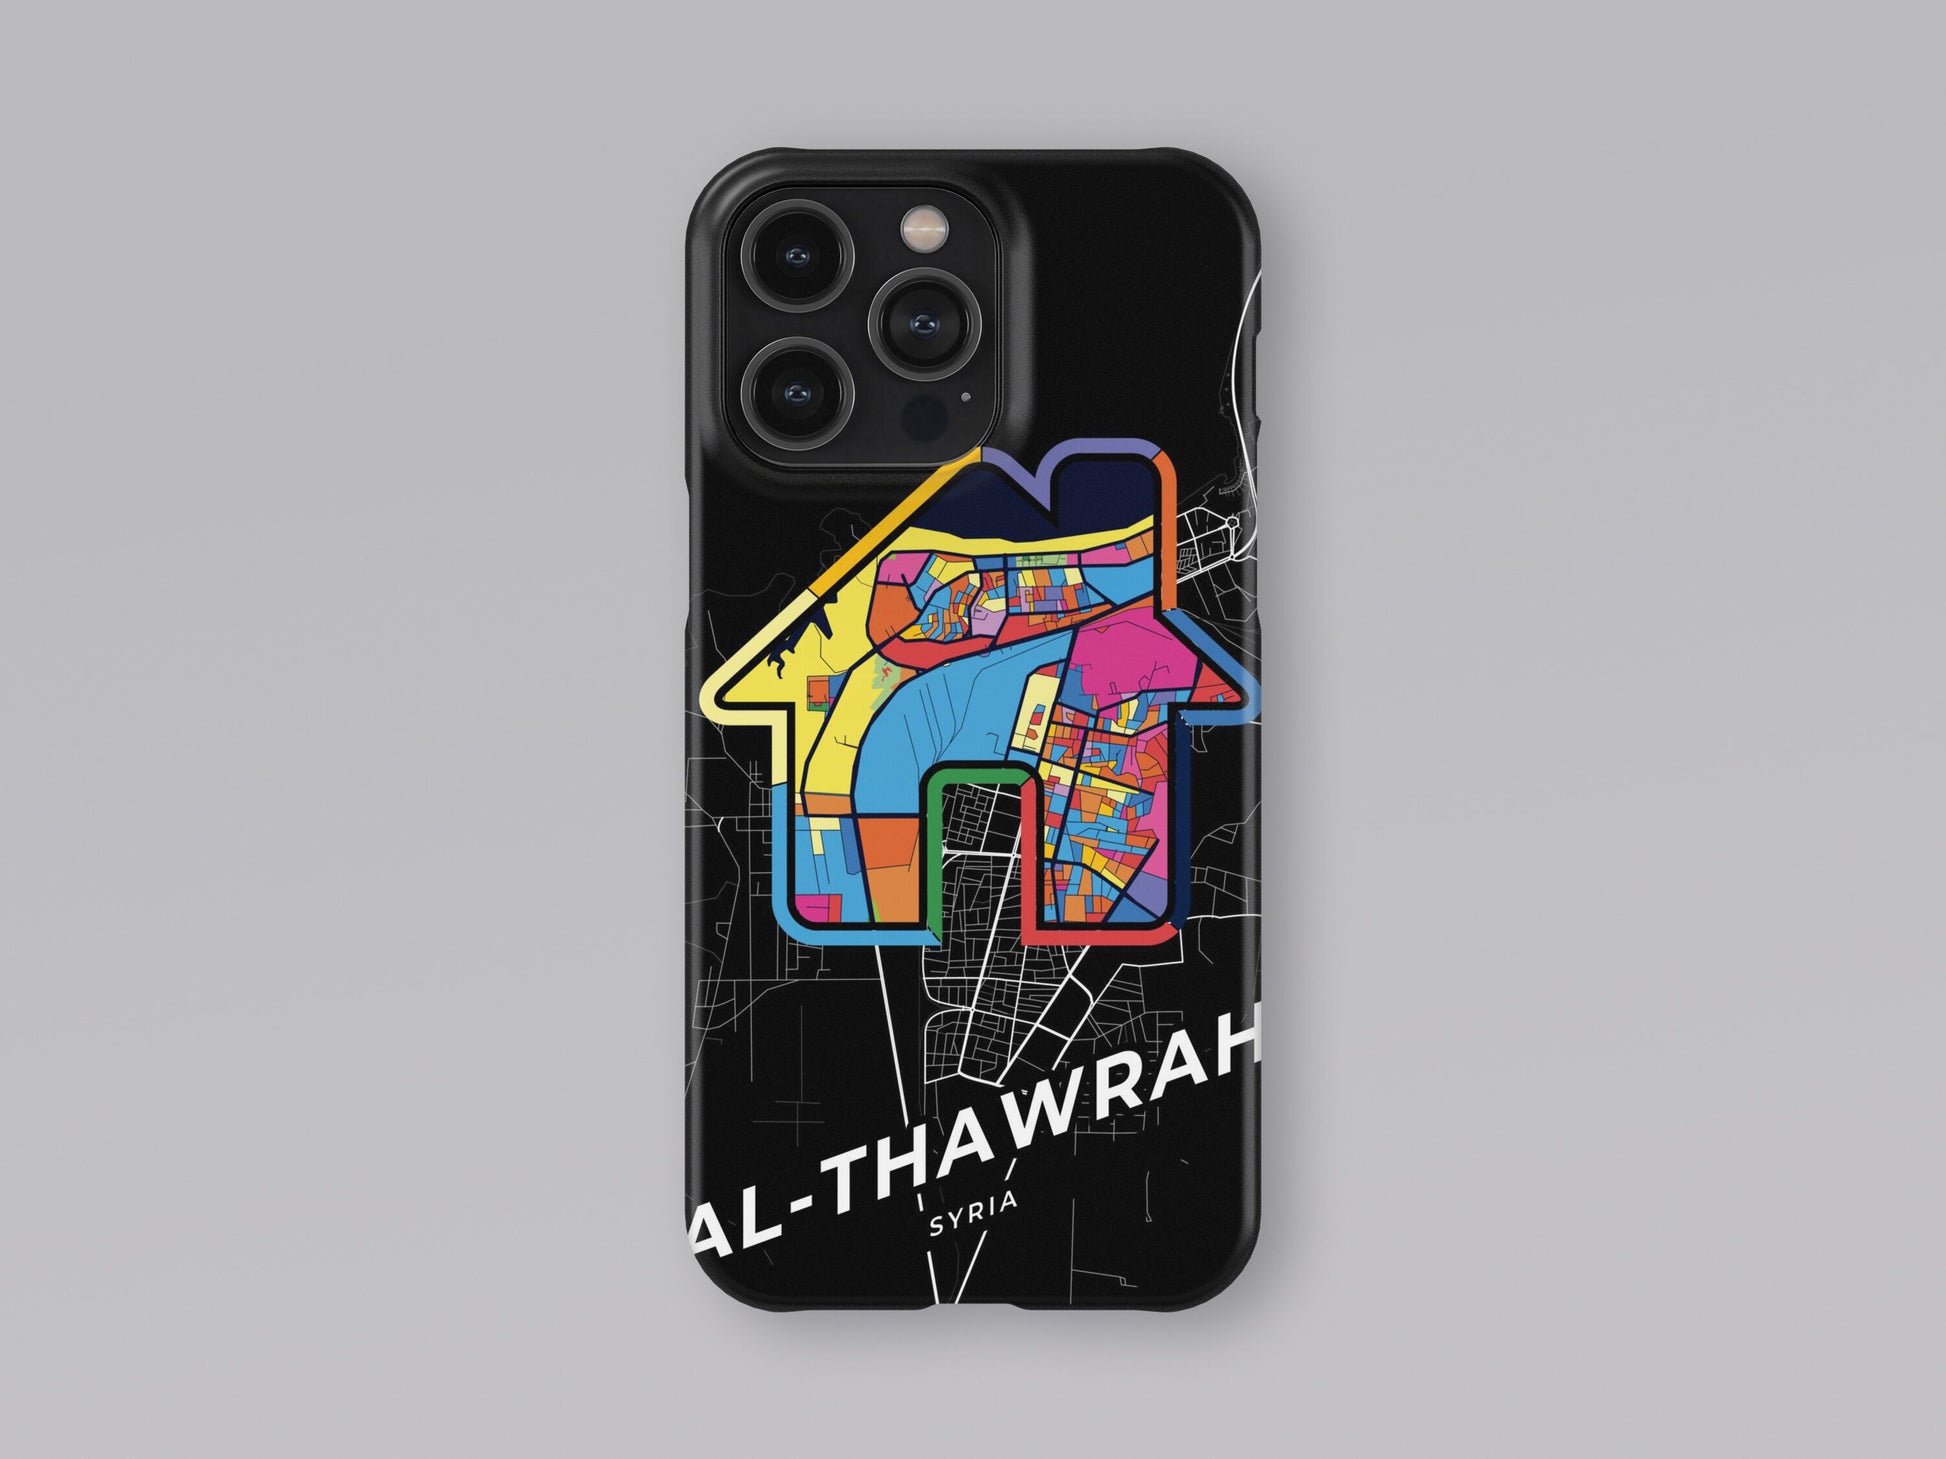 Al-Thawrah Syria slim phone case with colorful icon. Birthday, wedding or housewarming gift. Couple match cases. 3